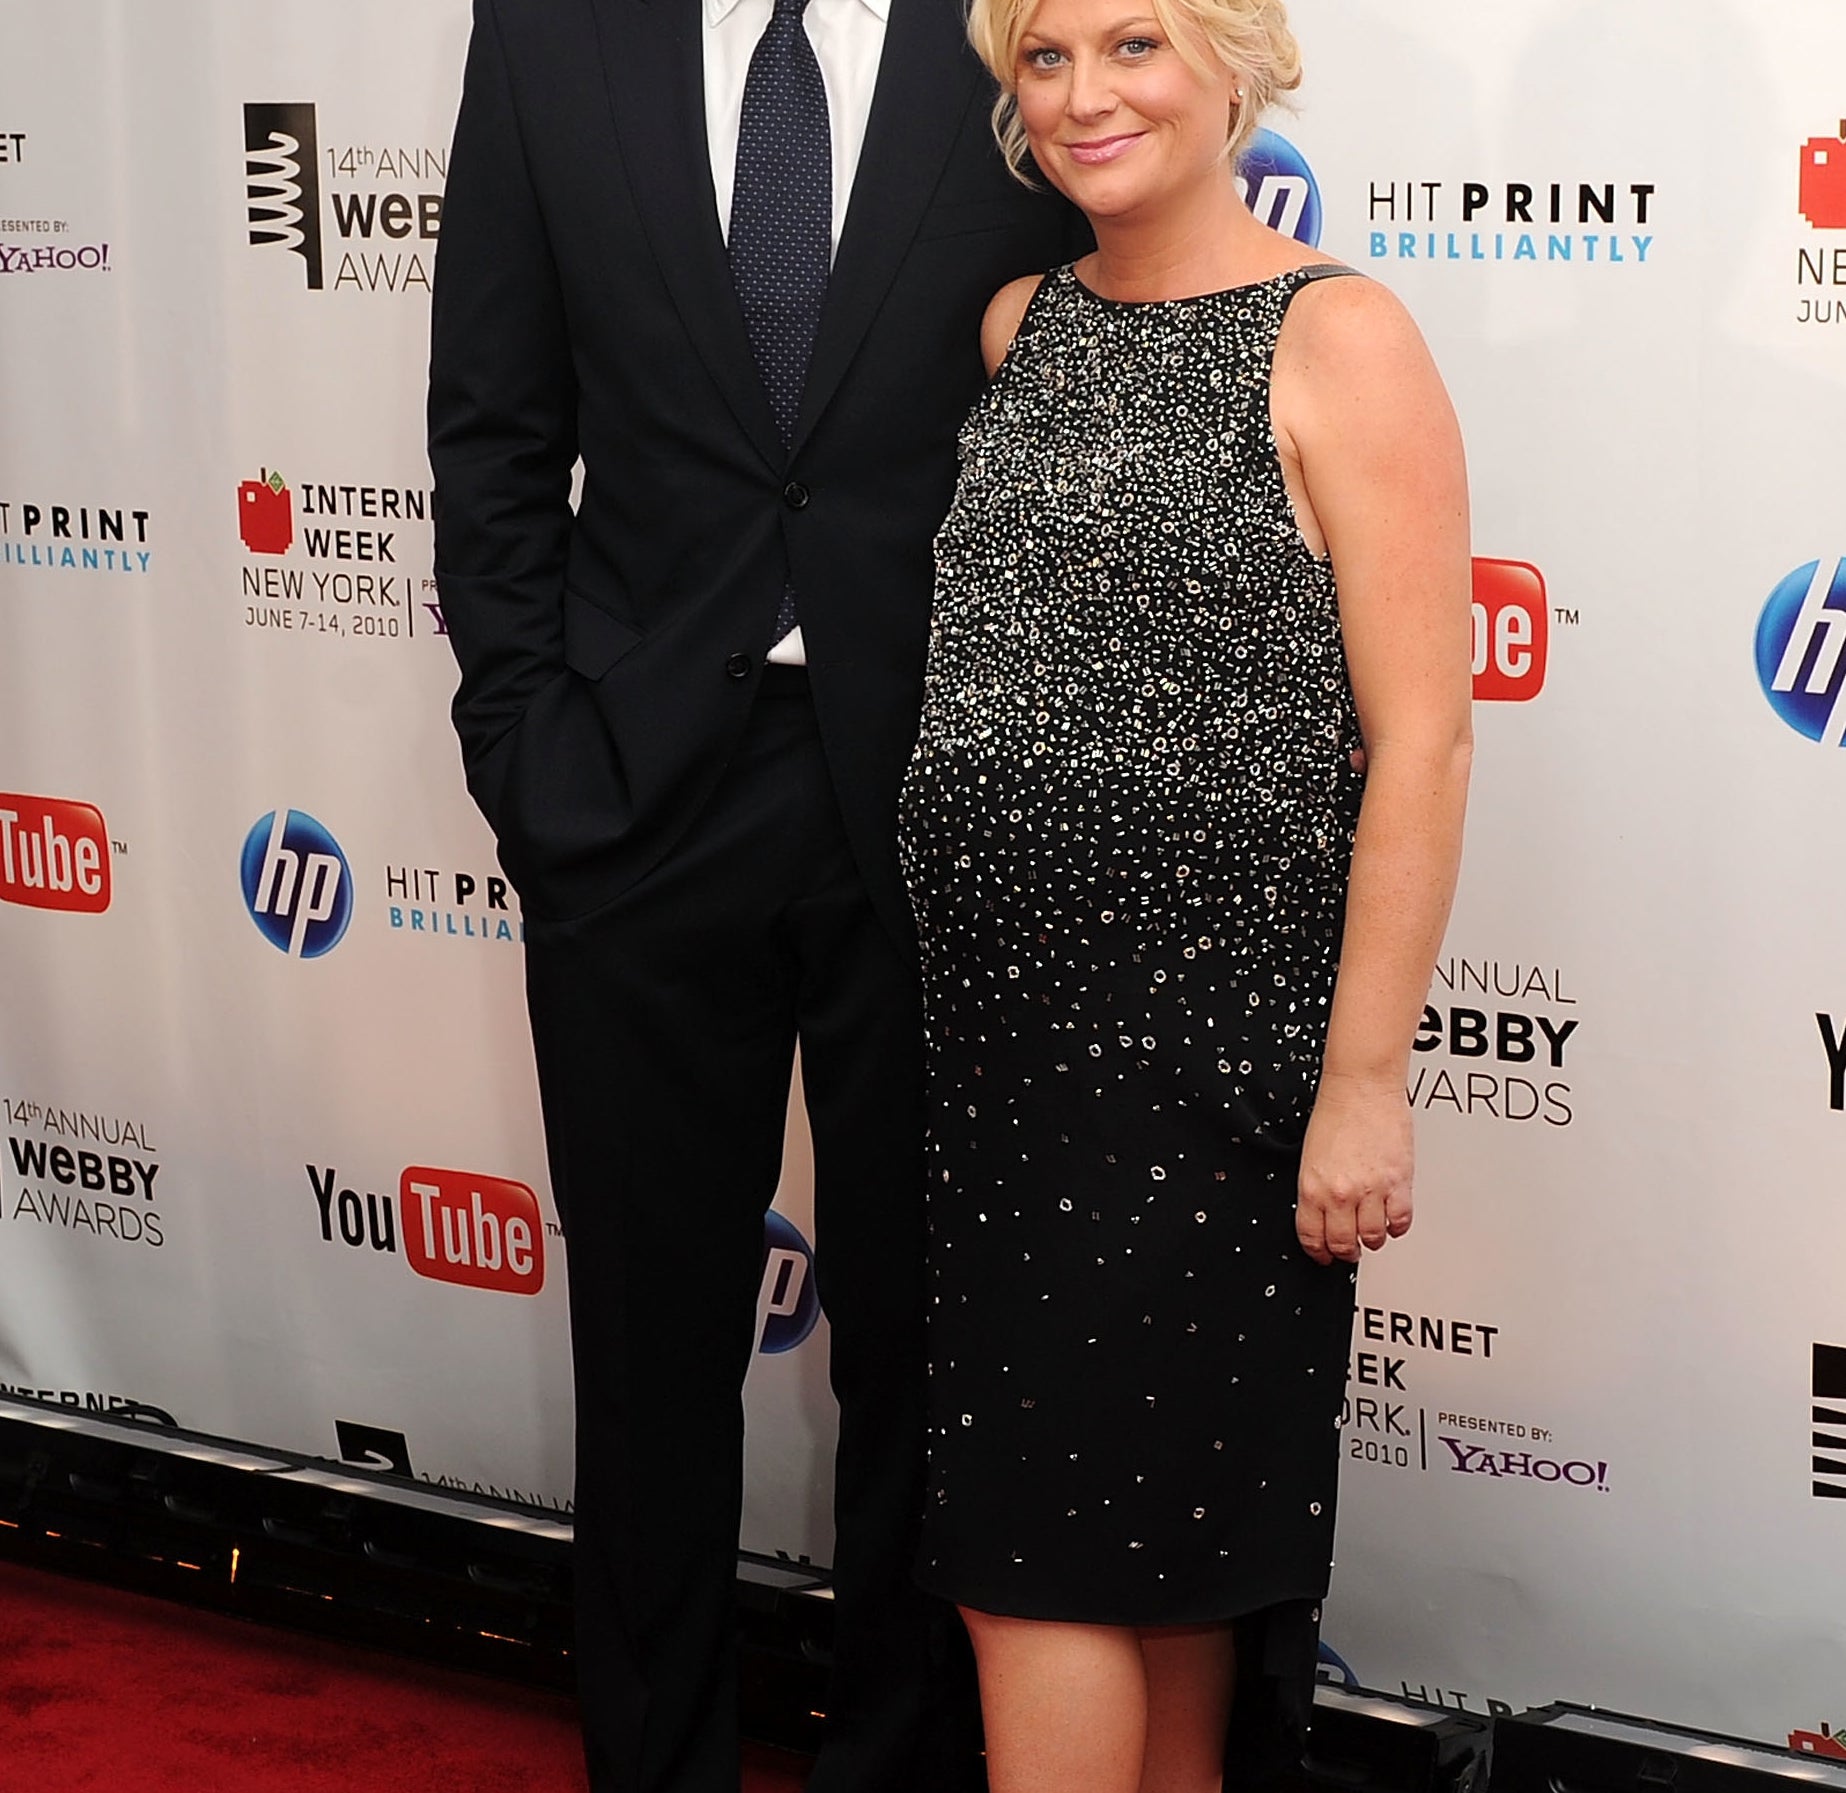 Will Arnett and Amy Poehler (who is pregnant and wearing a black stoned cocktail dress) on the red carpet of the 14th Annual Webby Awards in 2010